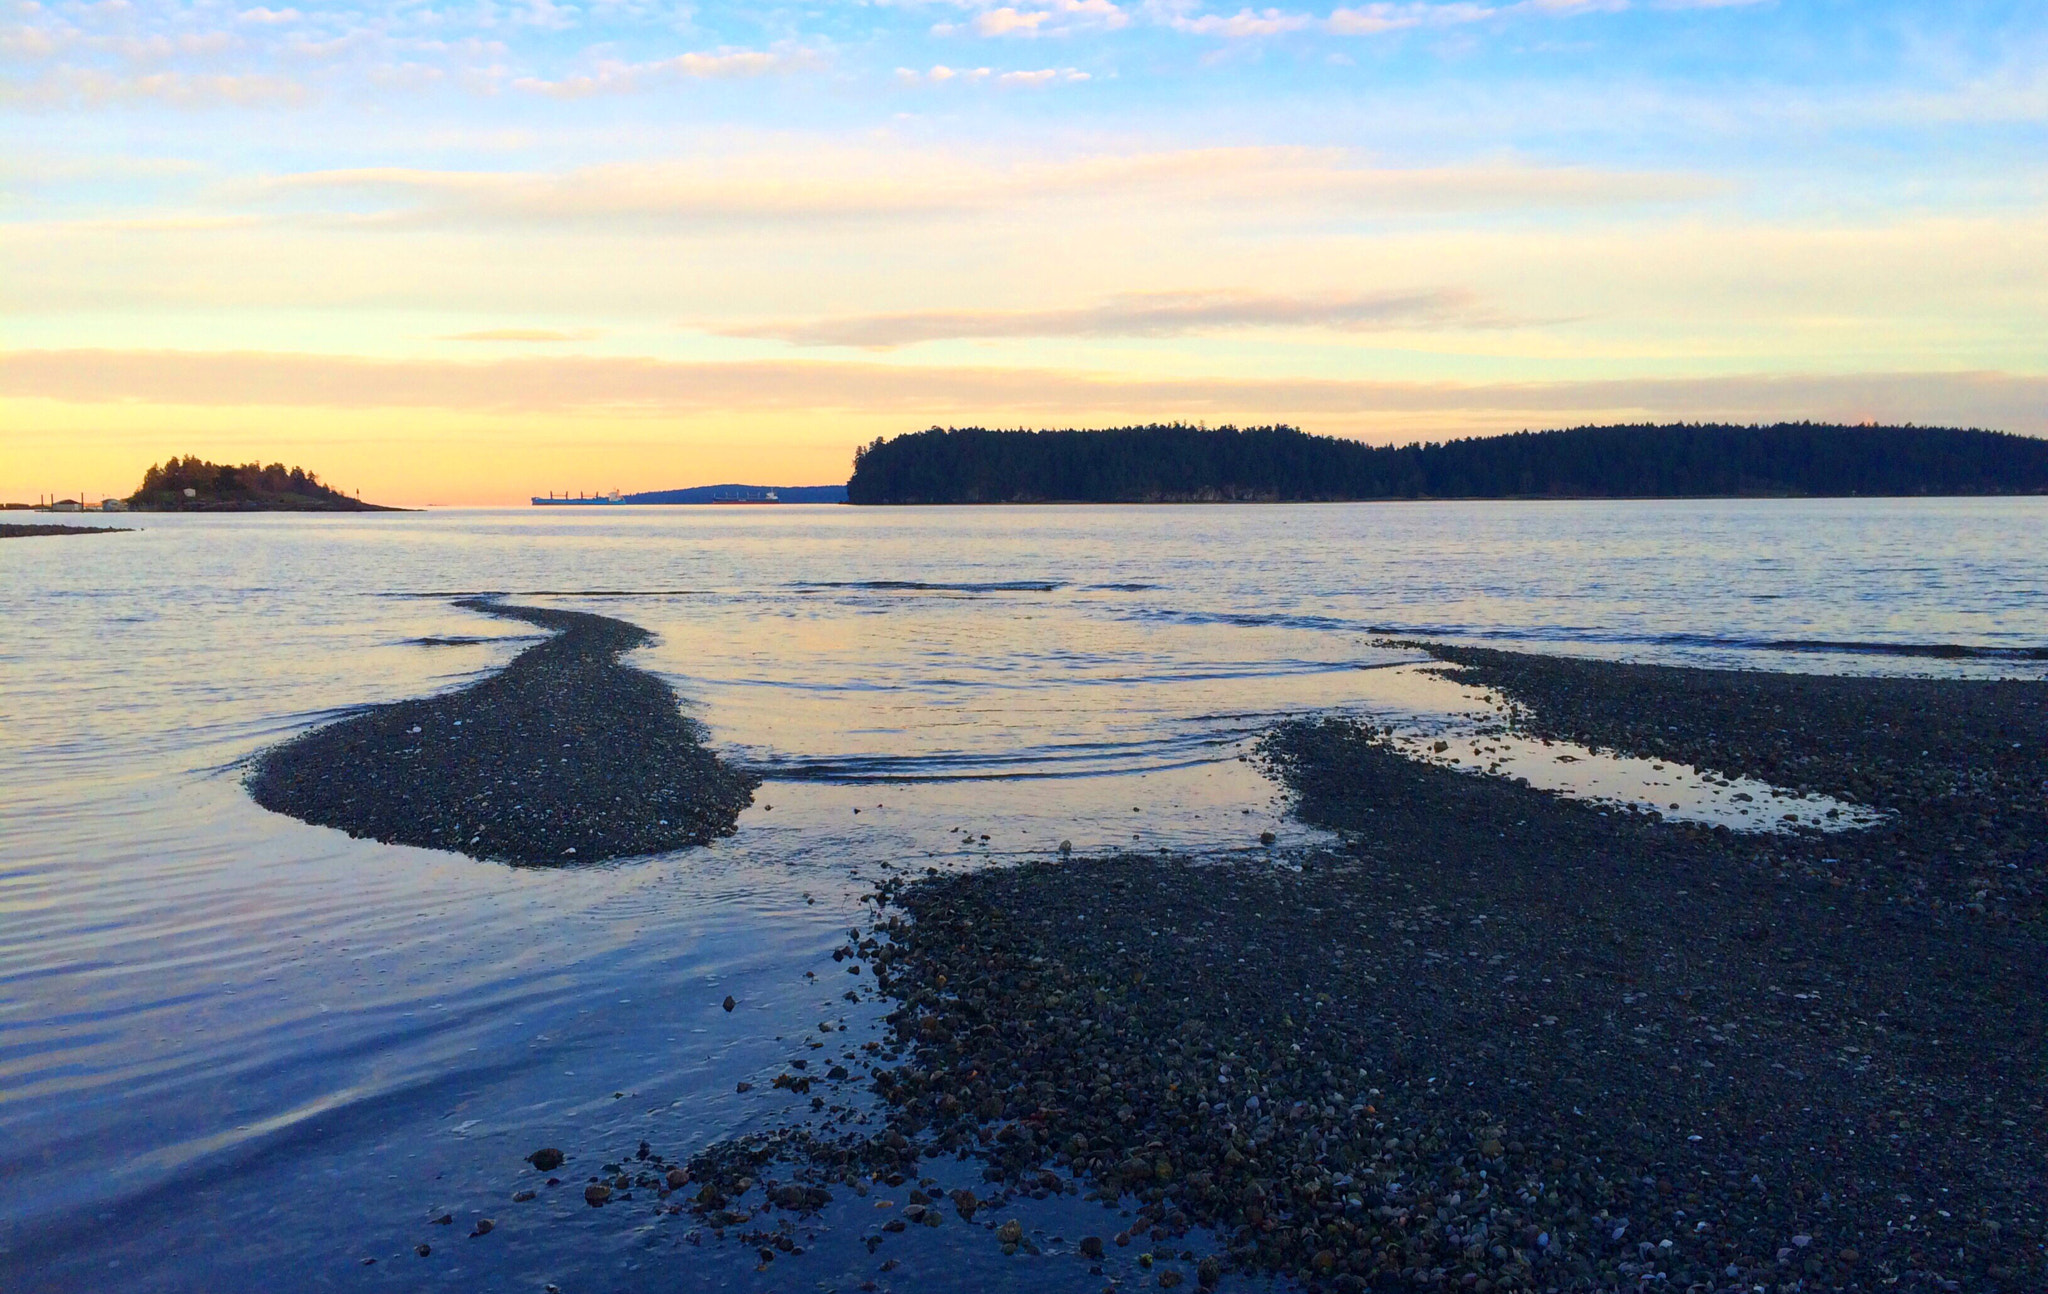 Apple iPhone6,1 sample photo. Sunrise at departure bay beach, vancouver island, bc, canada. photography